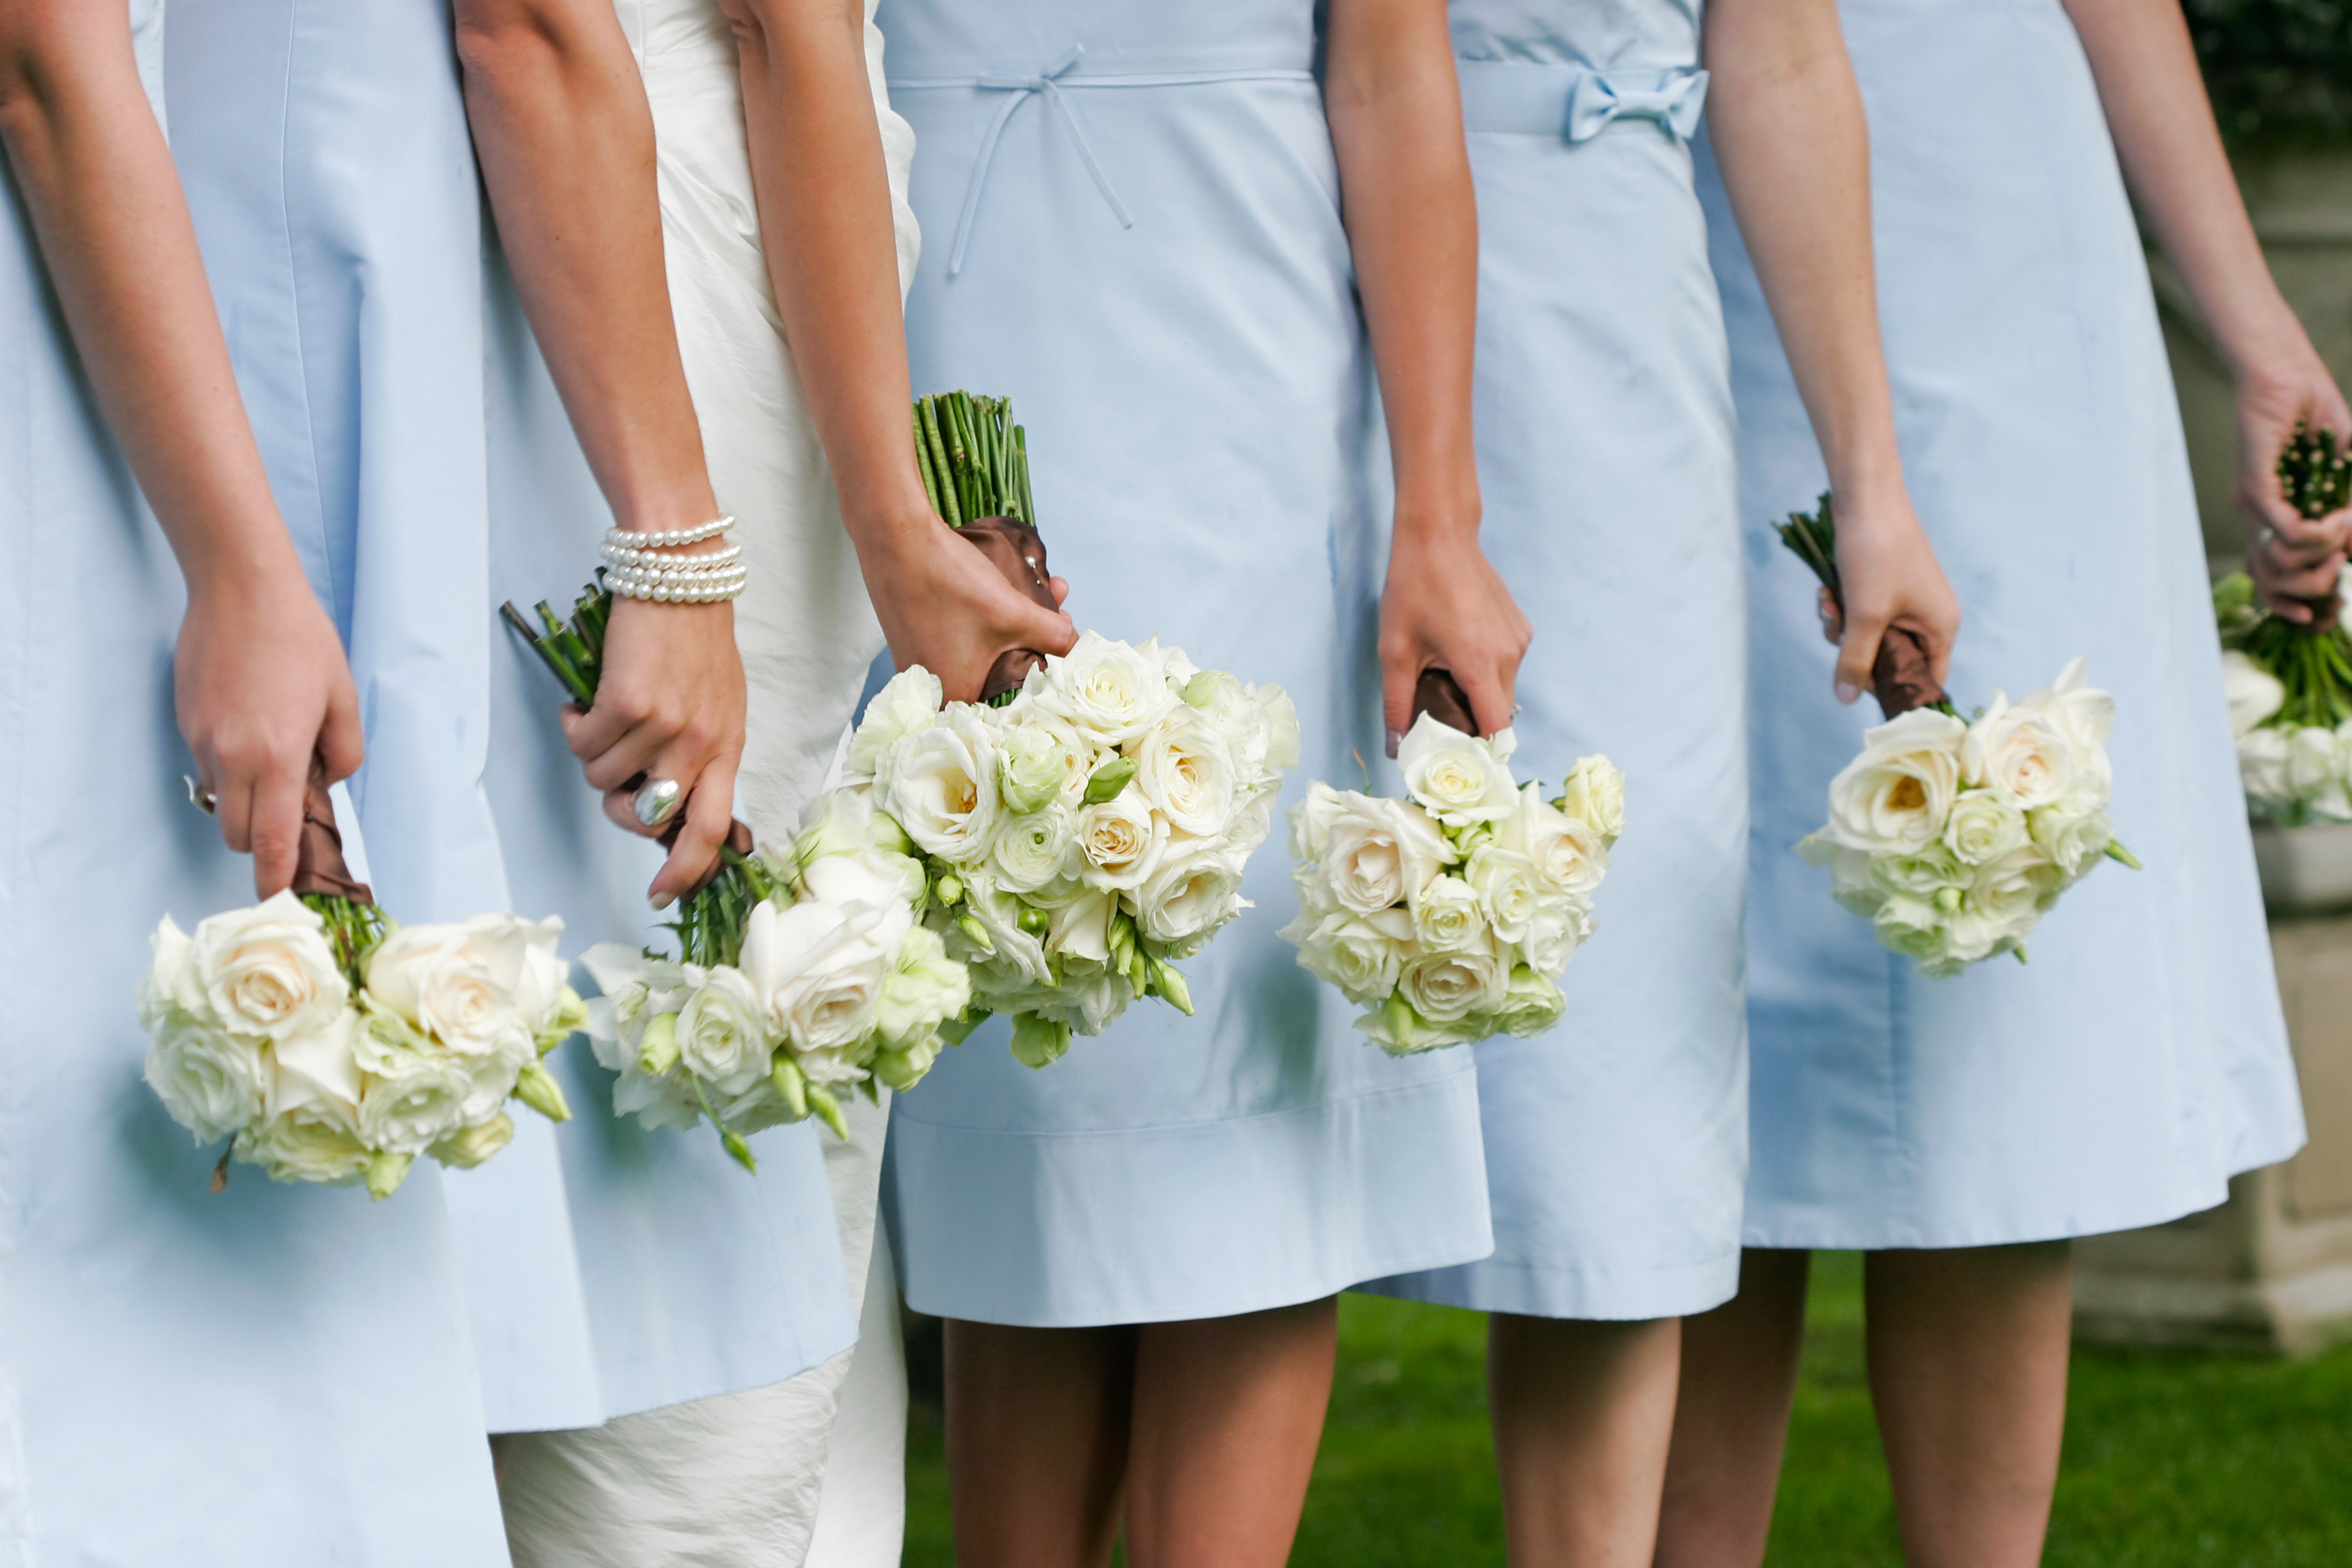 How to Tell a Friend You Can't Afford to Be a Bridesmaid